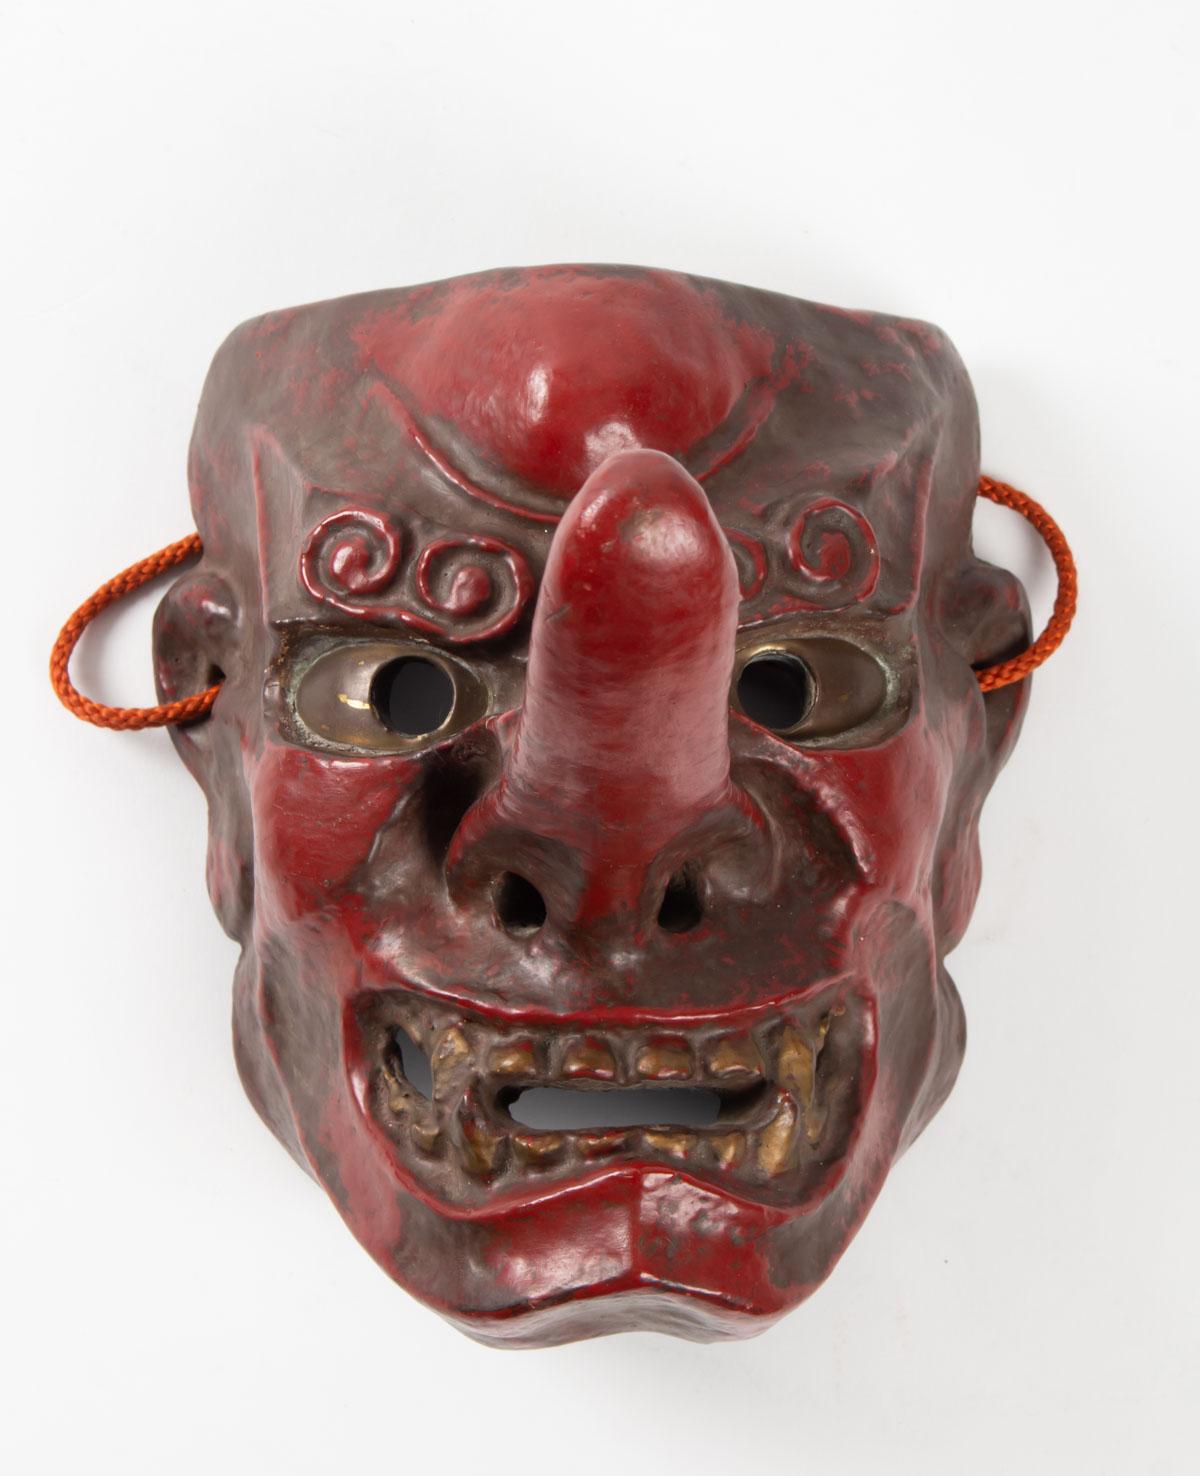 Tengu Mask, Japan wood, antiquity 1900, red lacquered wood, eyes brass
Measures: H 20cm, W 17cm, W 25cm.